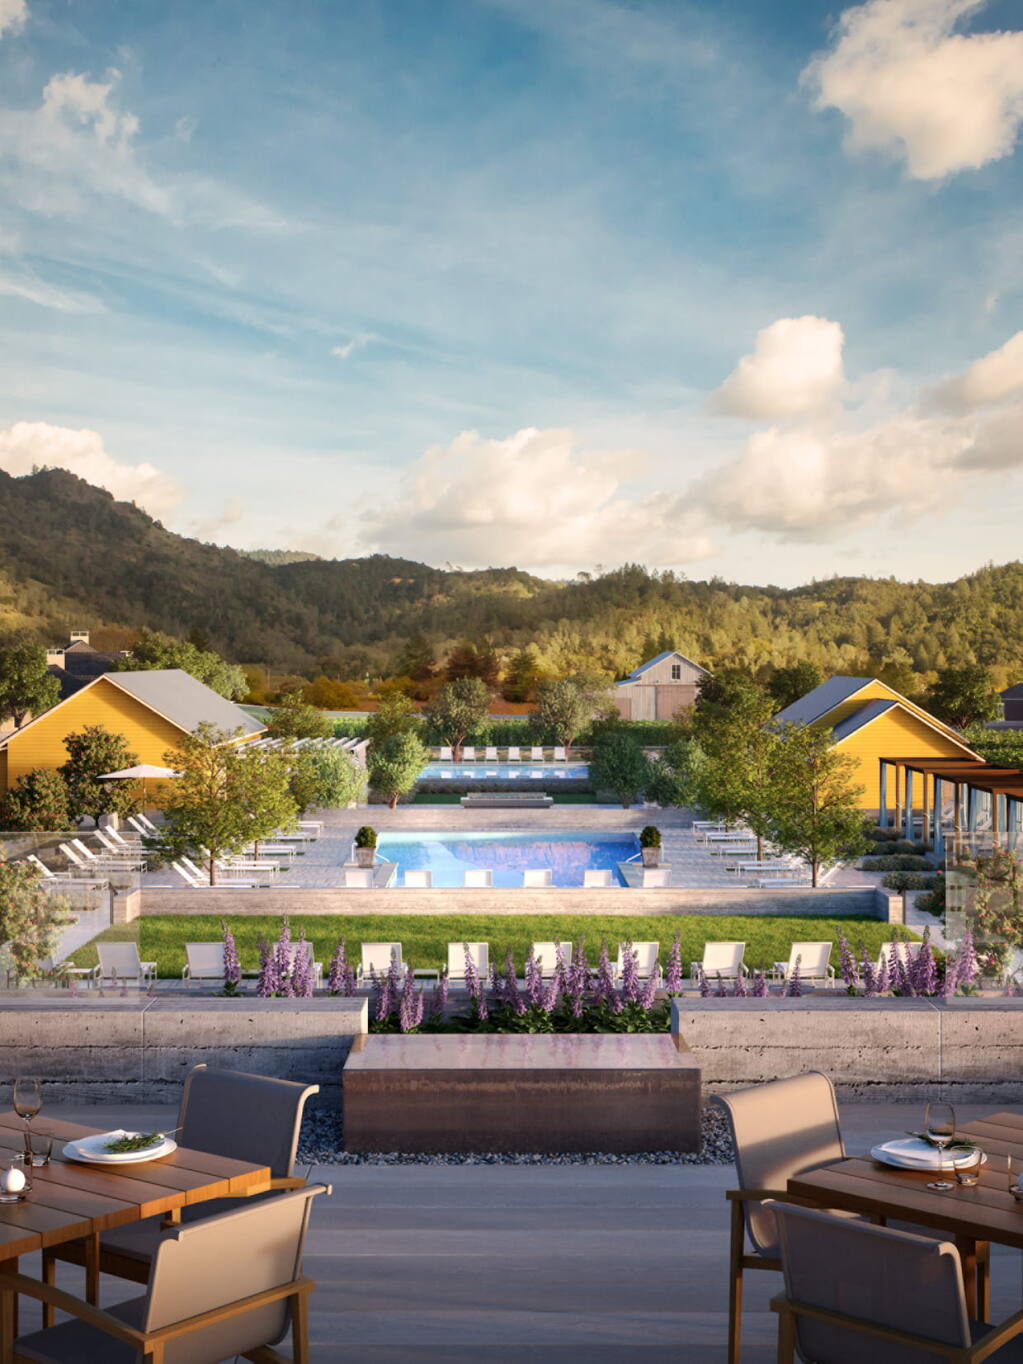 Four Seasons Resort and Residences Napa Valley is opening at 400 Silverado Trail in Calistoga. (courtesy of Four Seasons)